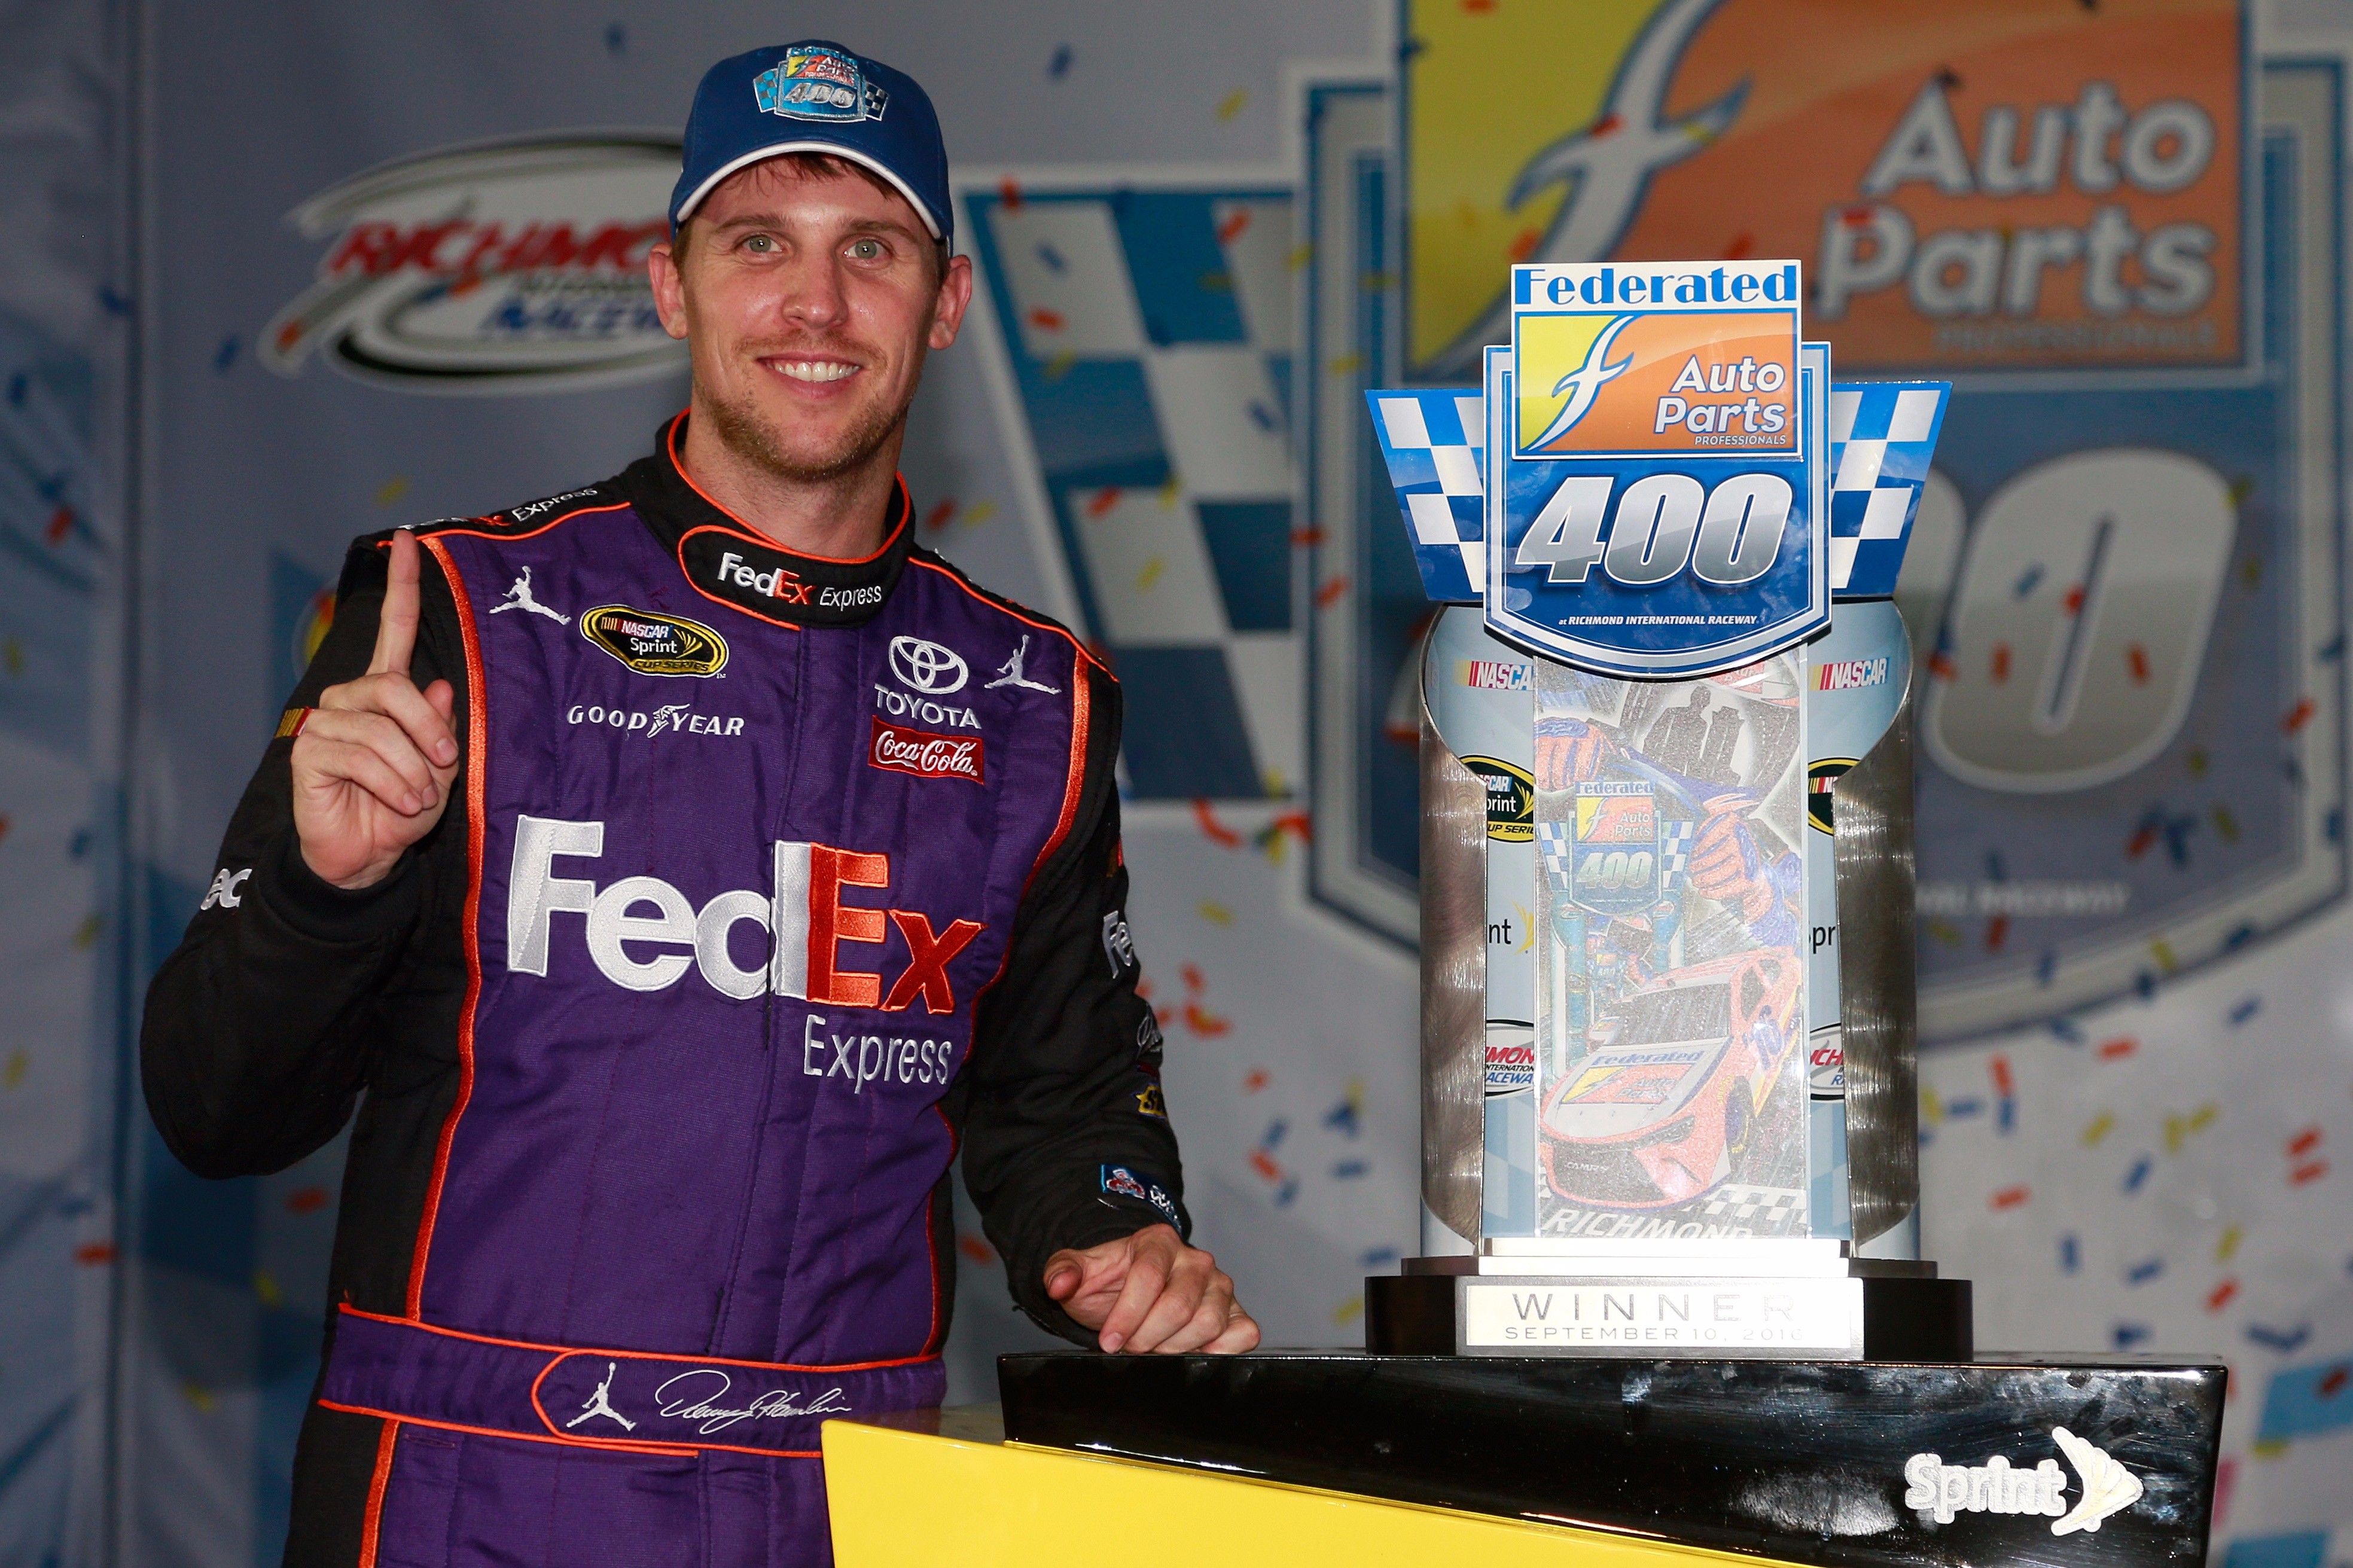 Hamlin Wins at Richmond - Chase Field Set For Top 16